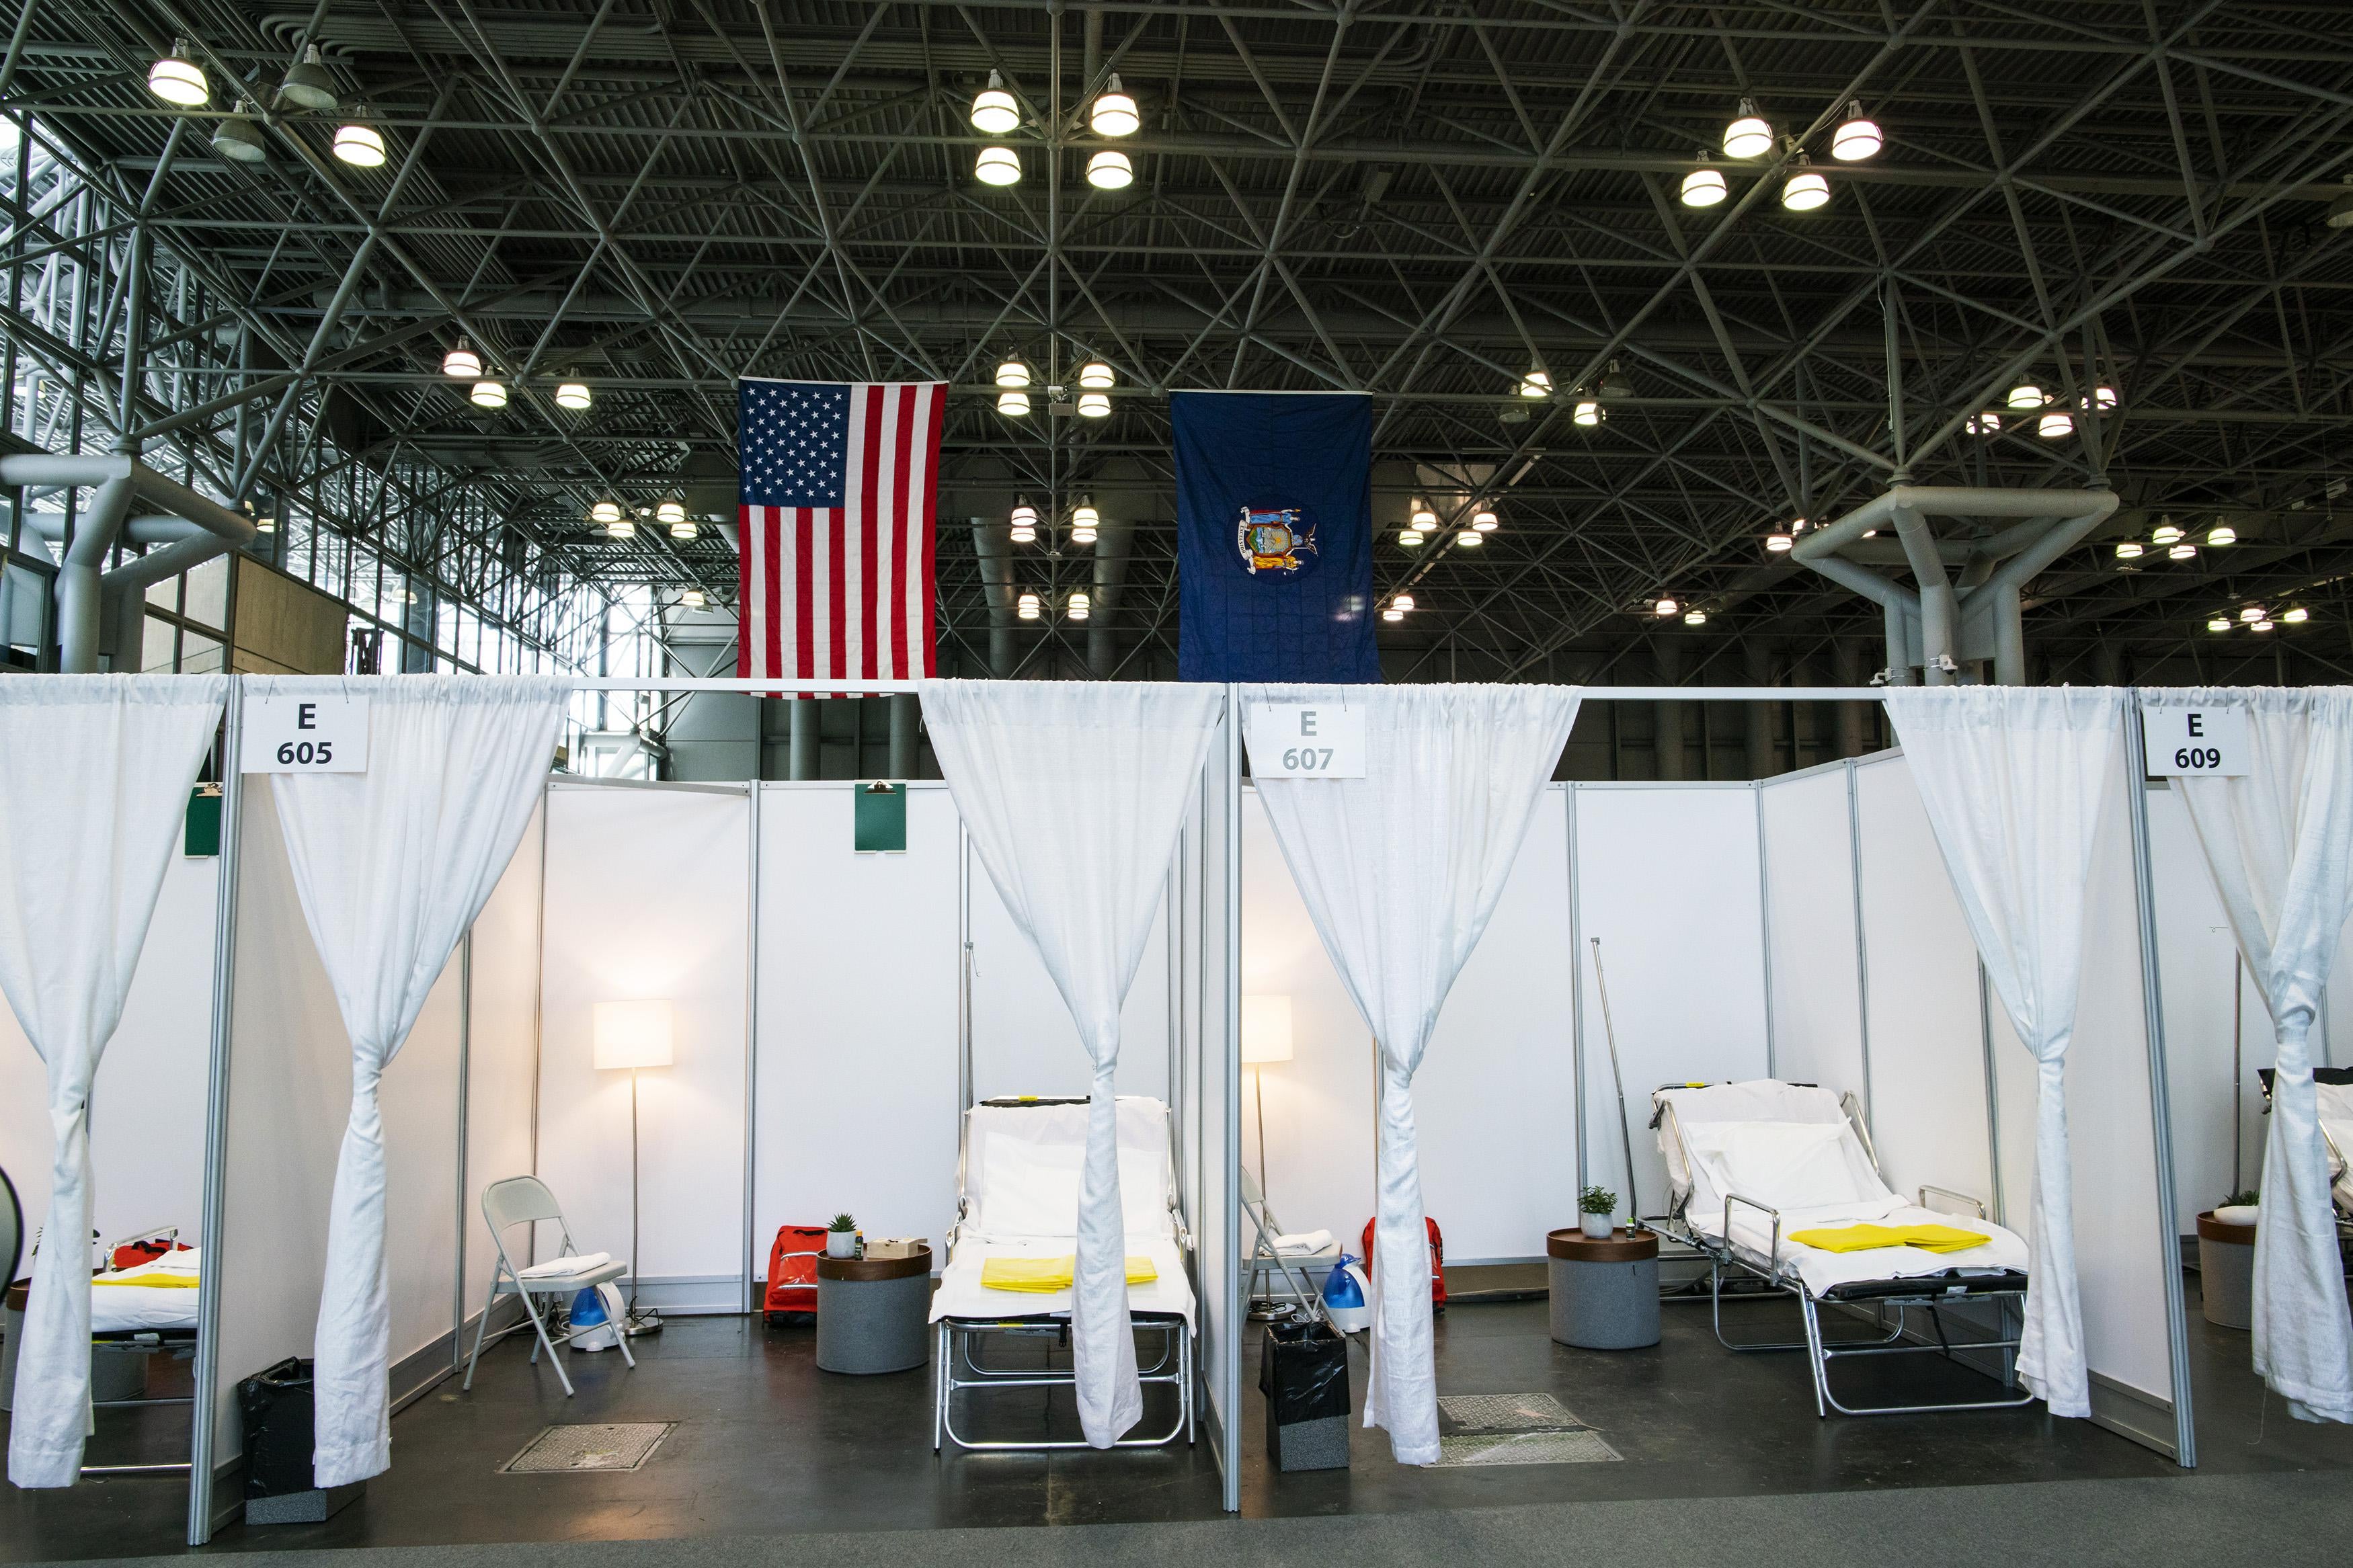 Hospital bed booths at the Javits Convention Center in New York City, which the military temporarily turned into a hospital to help fight coronavirus cases.